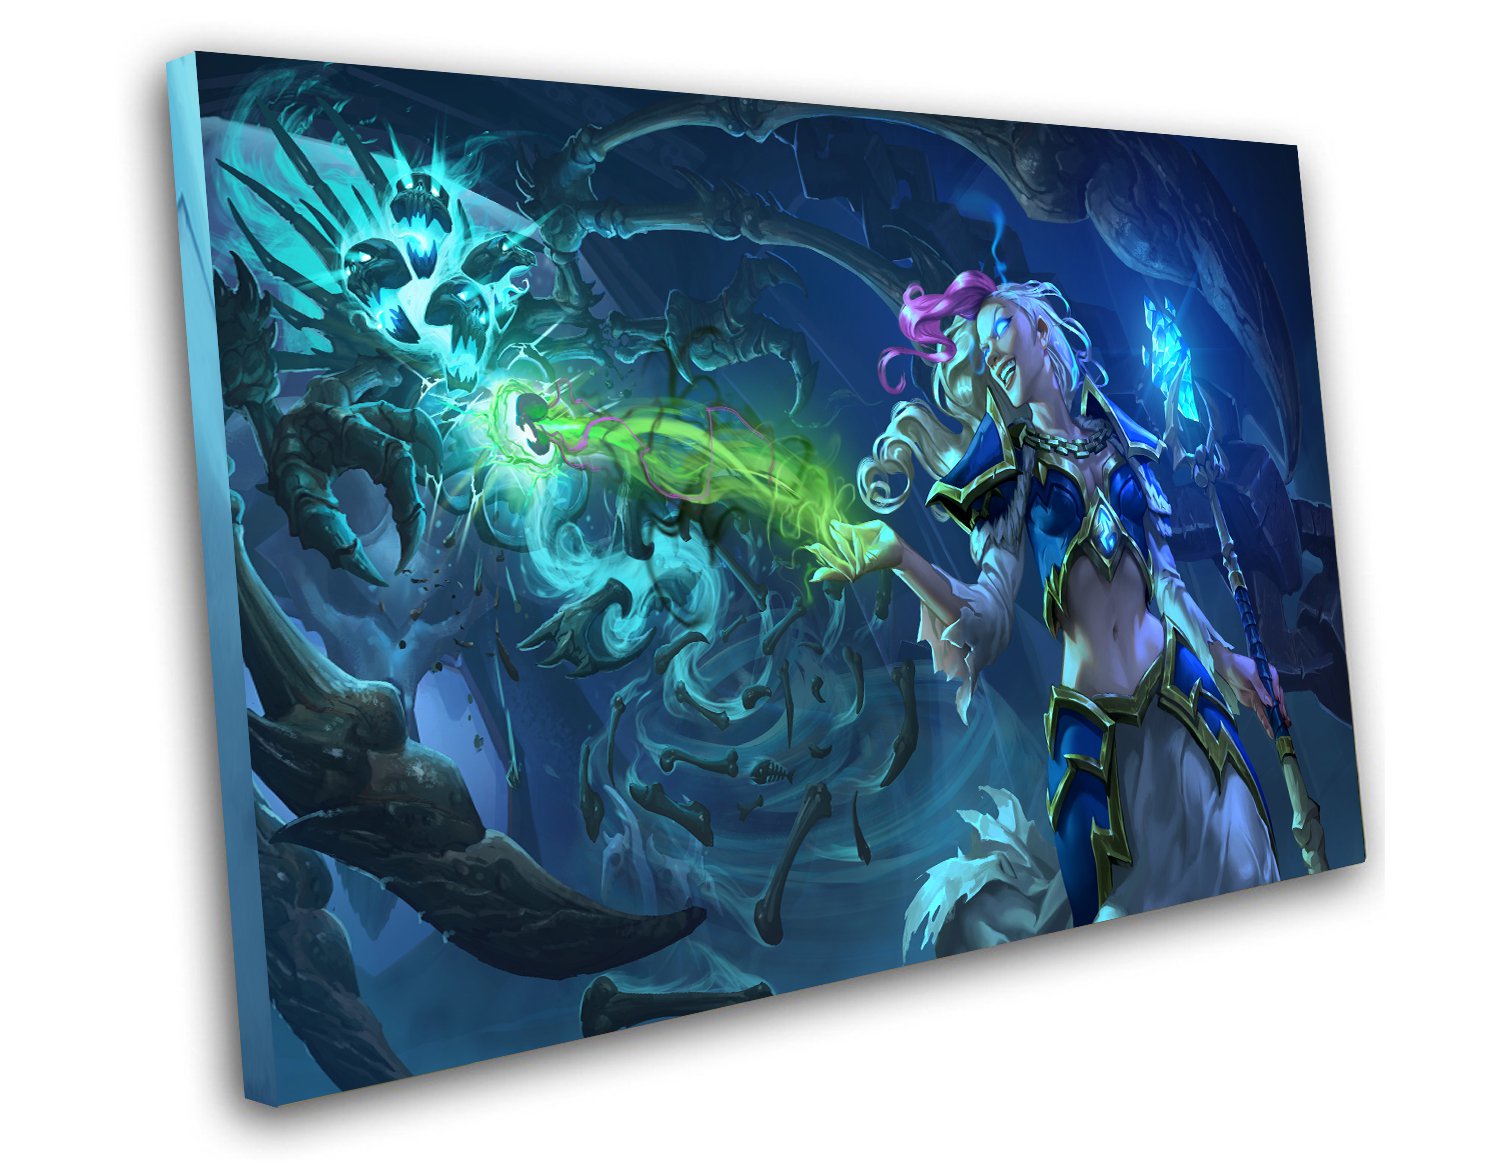 Hearthstone Knights of the Frozen Throne Game 12"x16" (30cm/40cm) Canvas Print